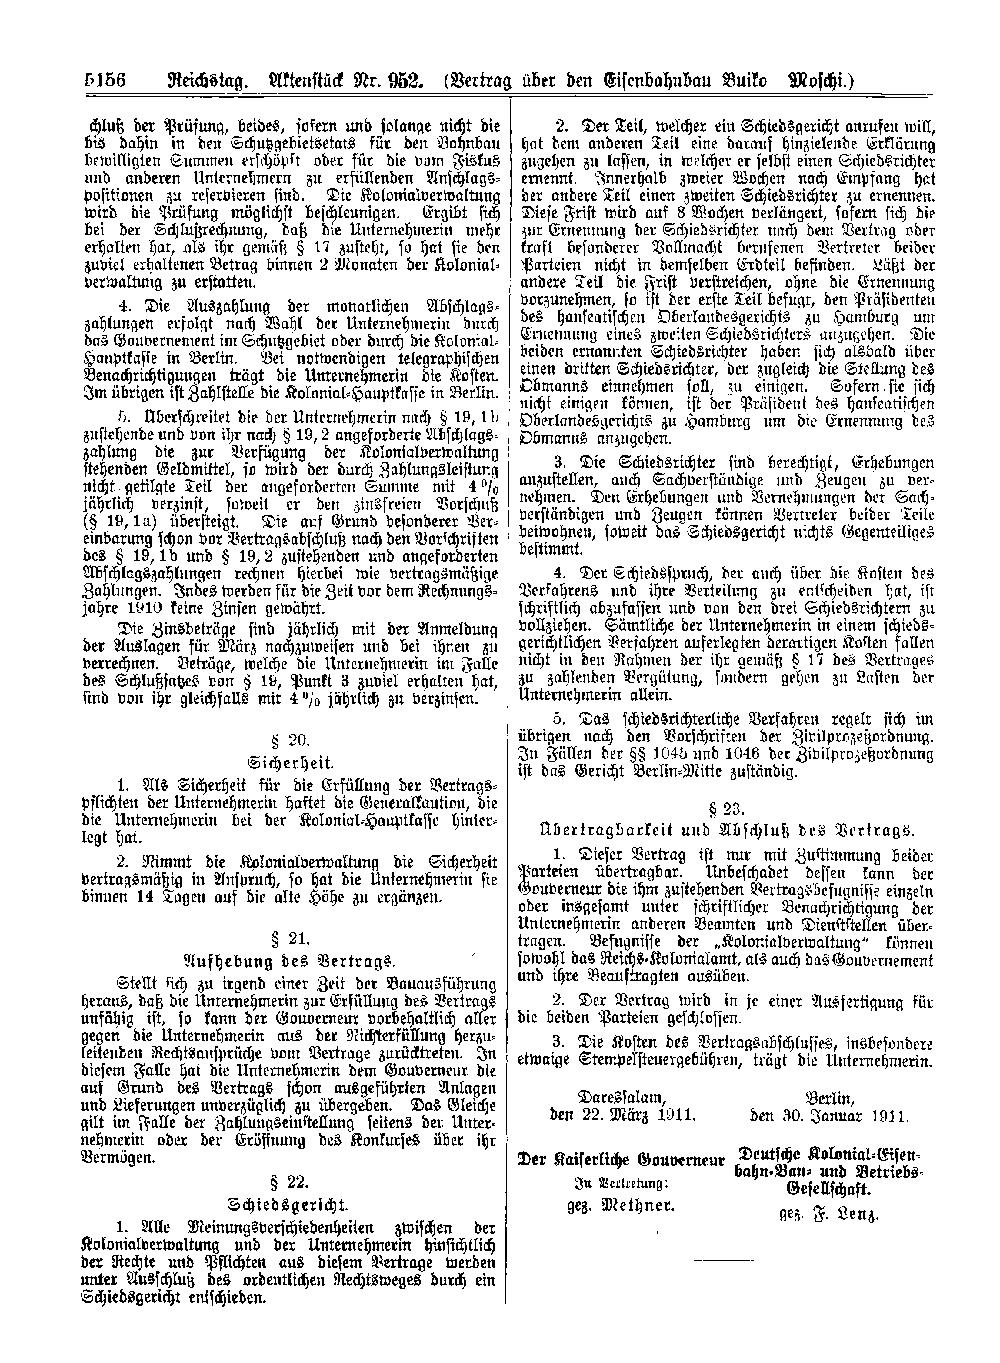 Scan of page 5156